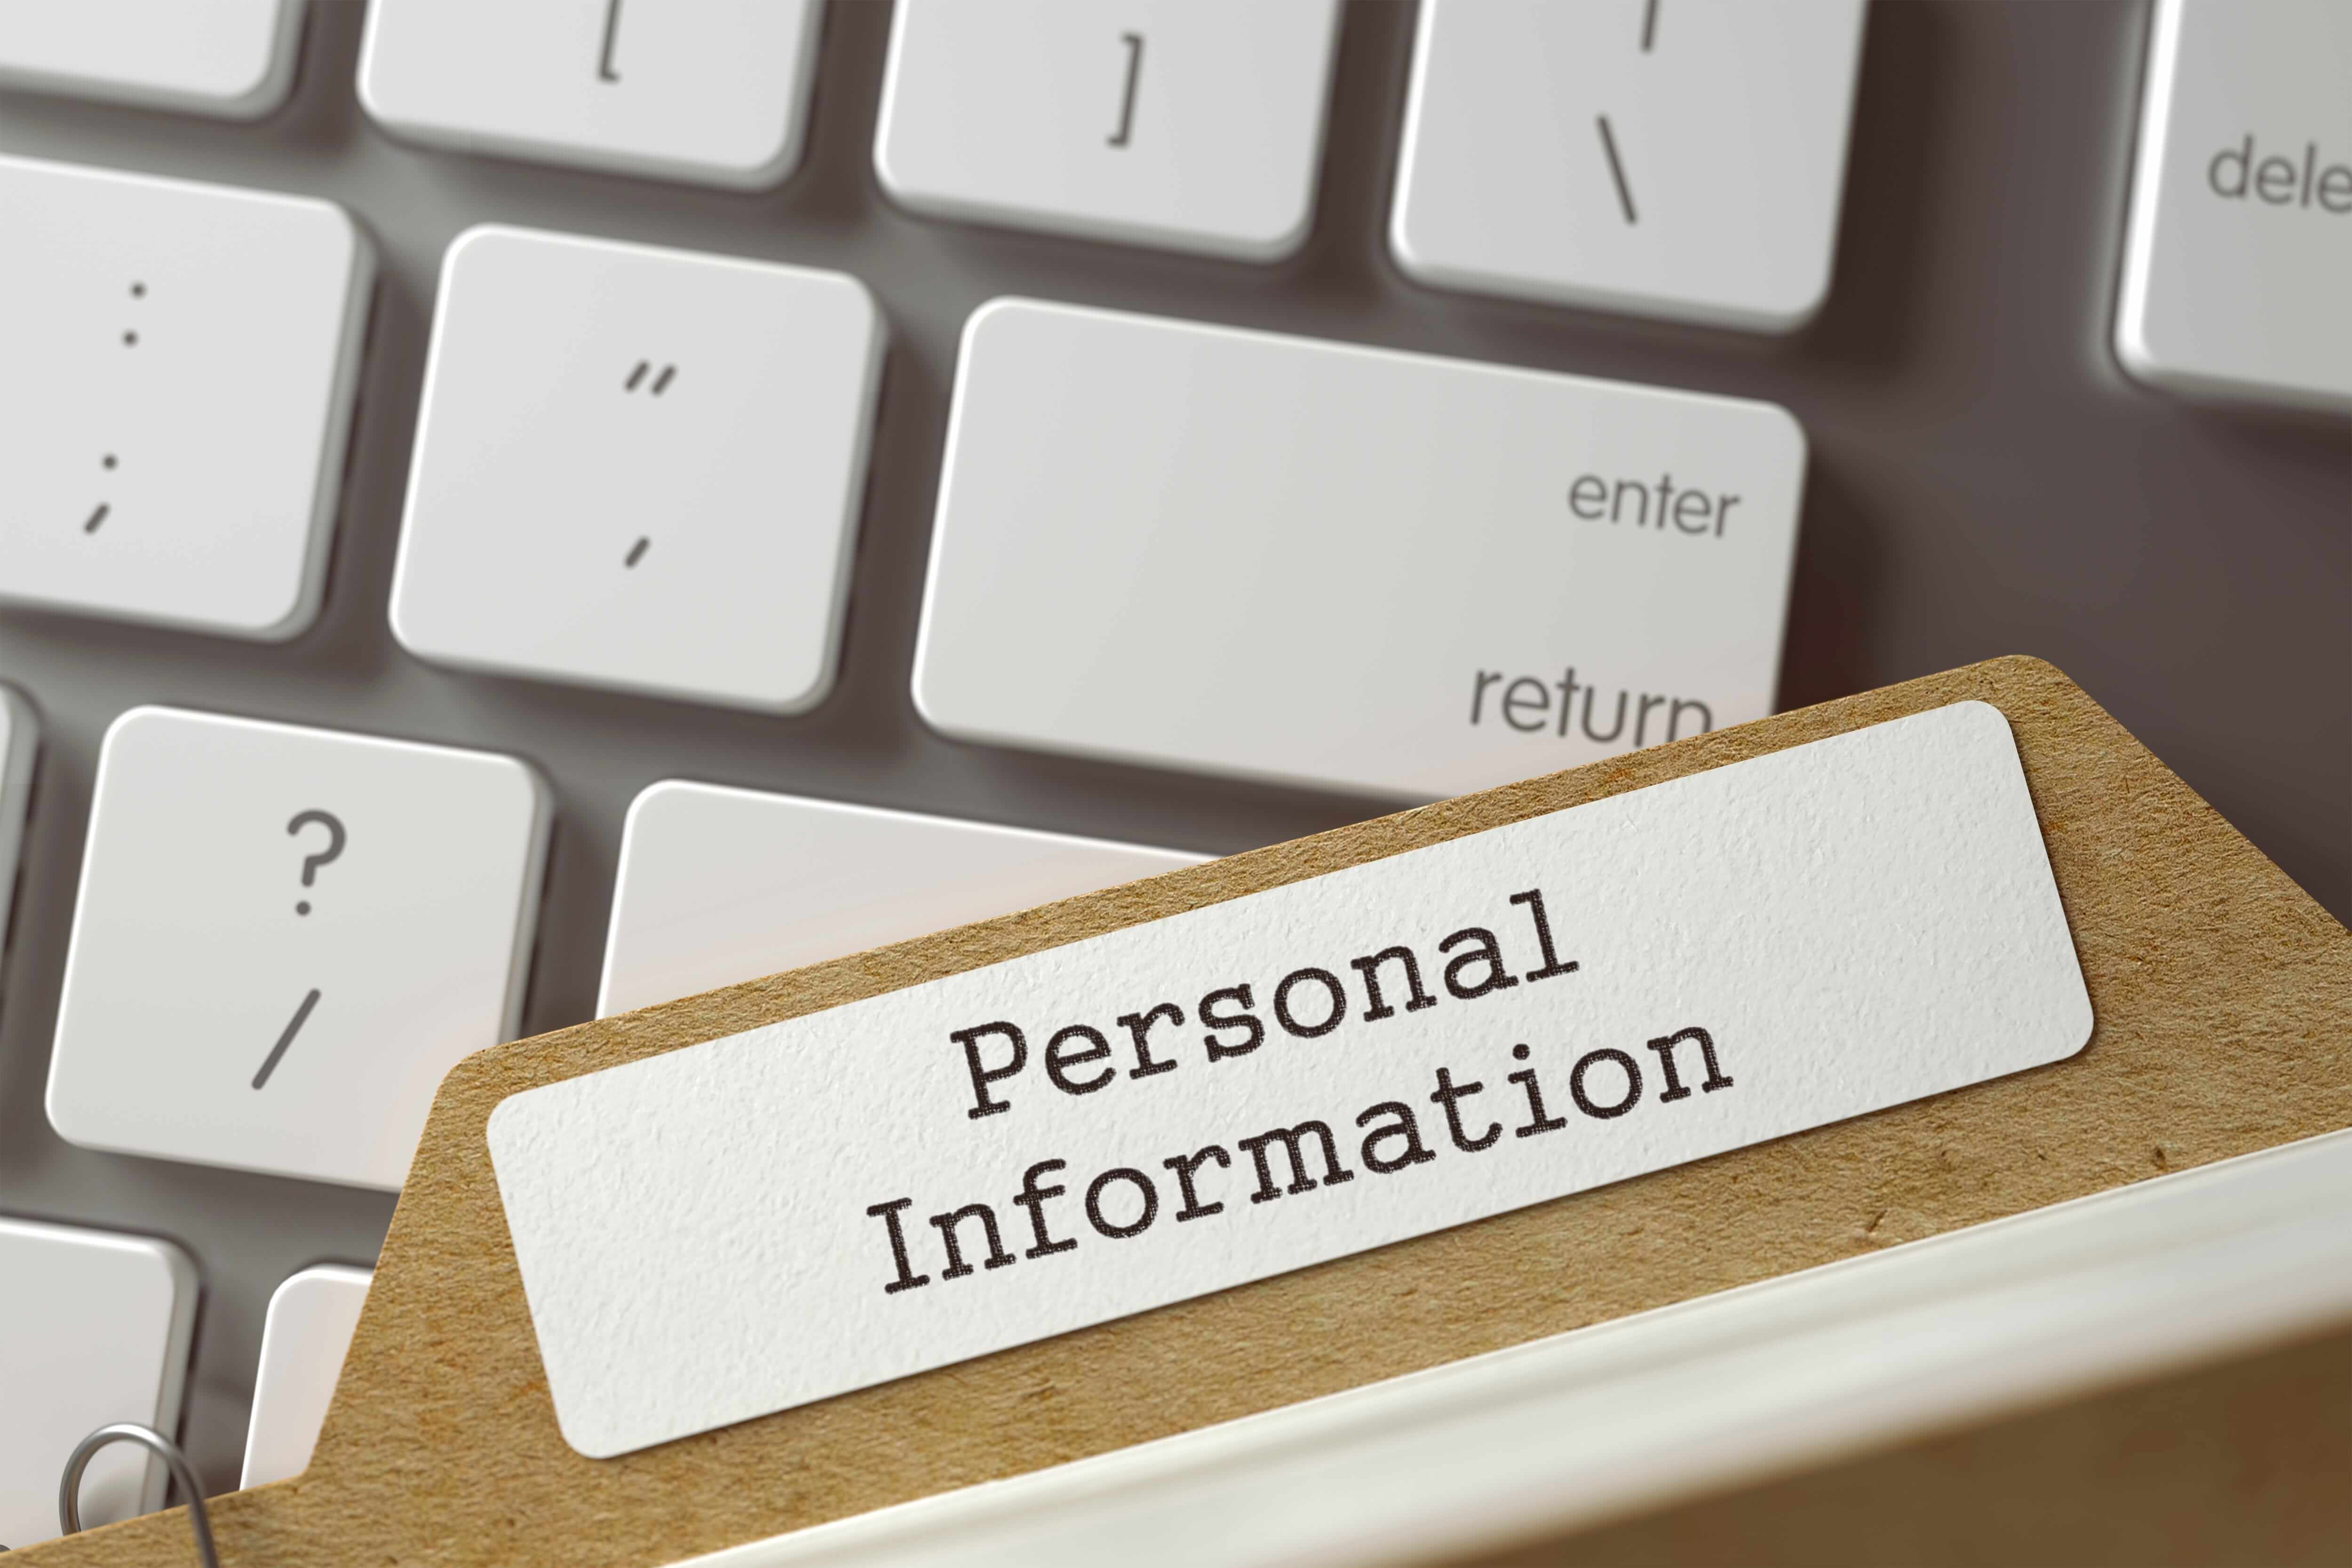 background check personal information